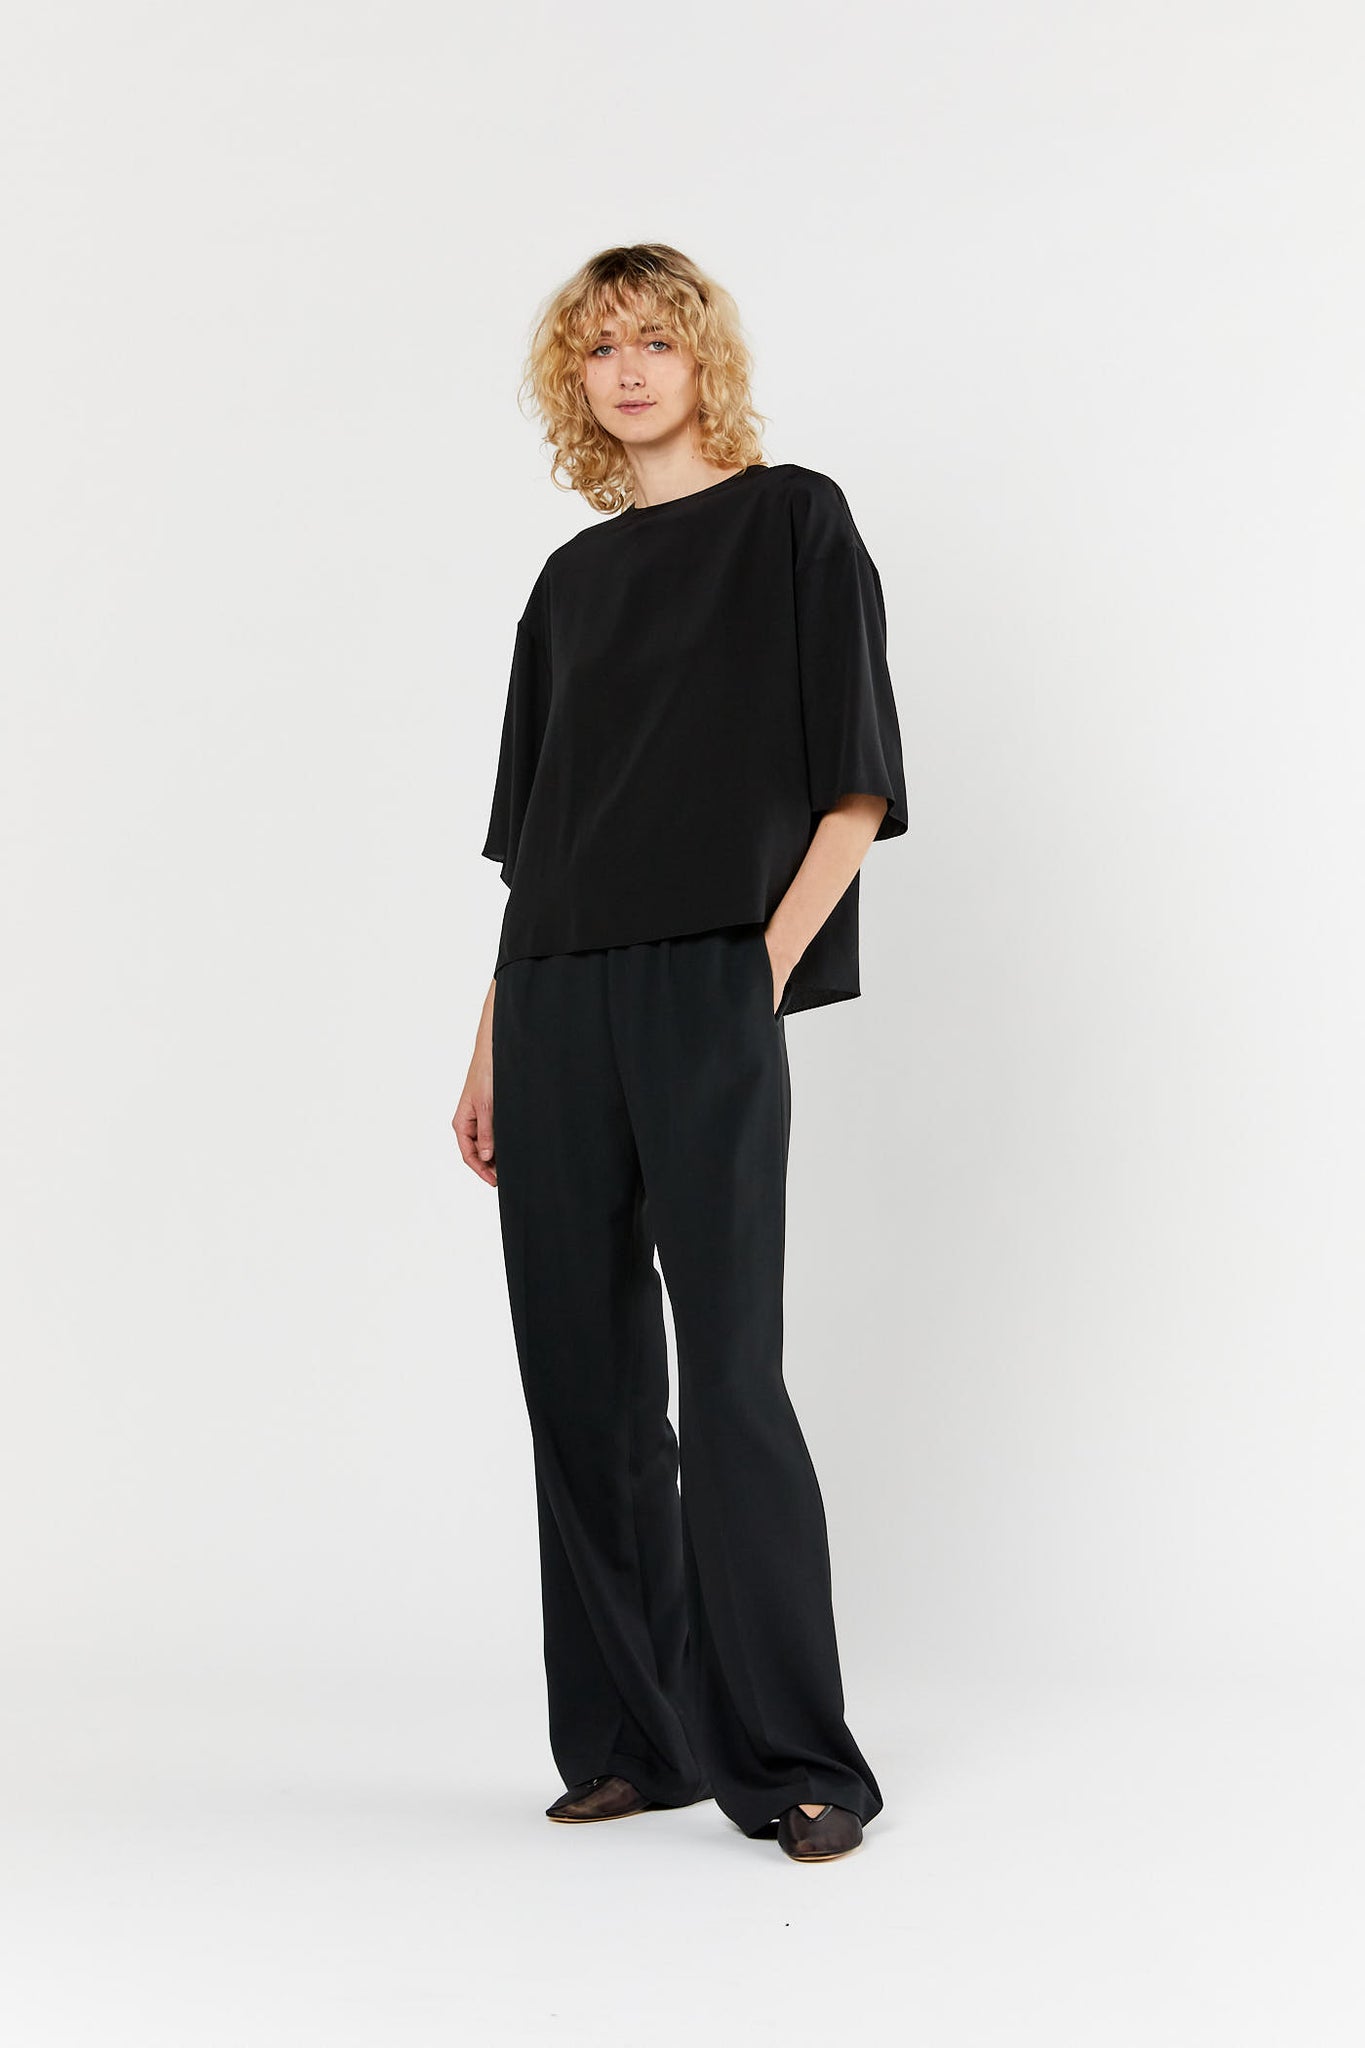 Women's New Arrivals – ByGeorge